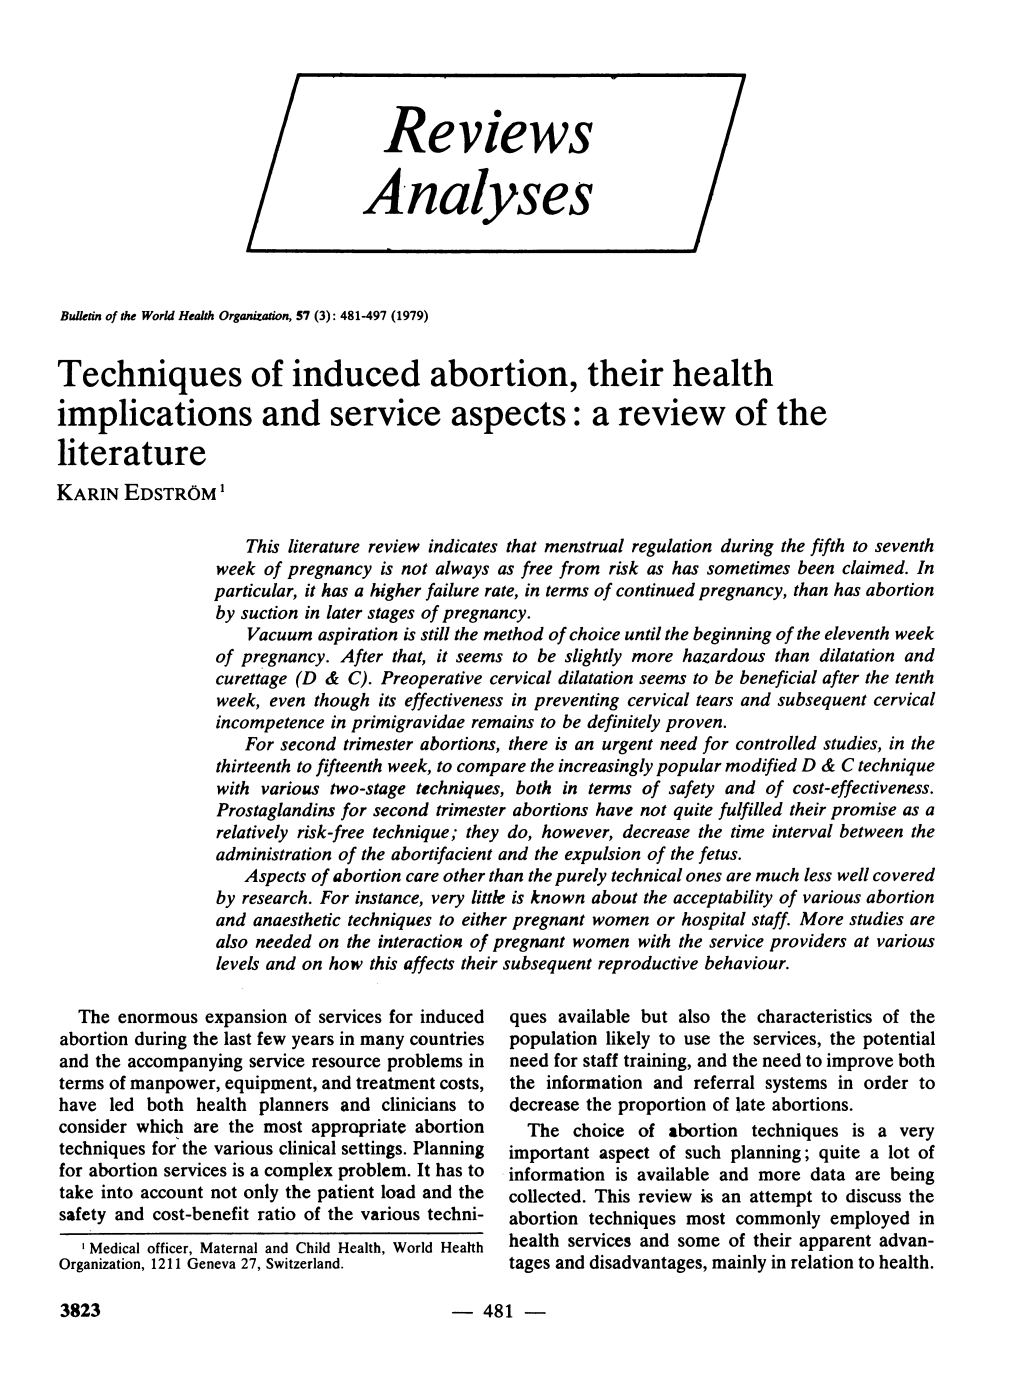 Techniques of Induced Abortion, Their Health Implications and Service Aspects: a Review of the Literature KARIN EDSTROM'